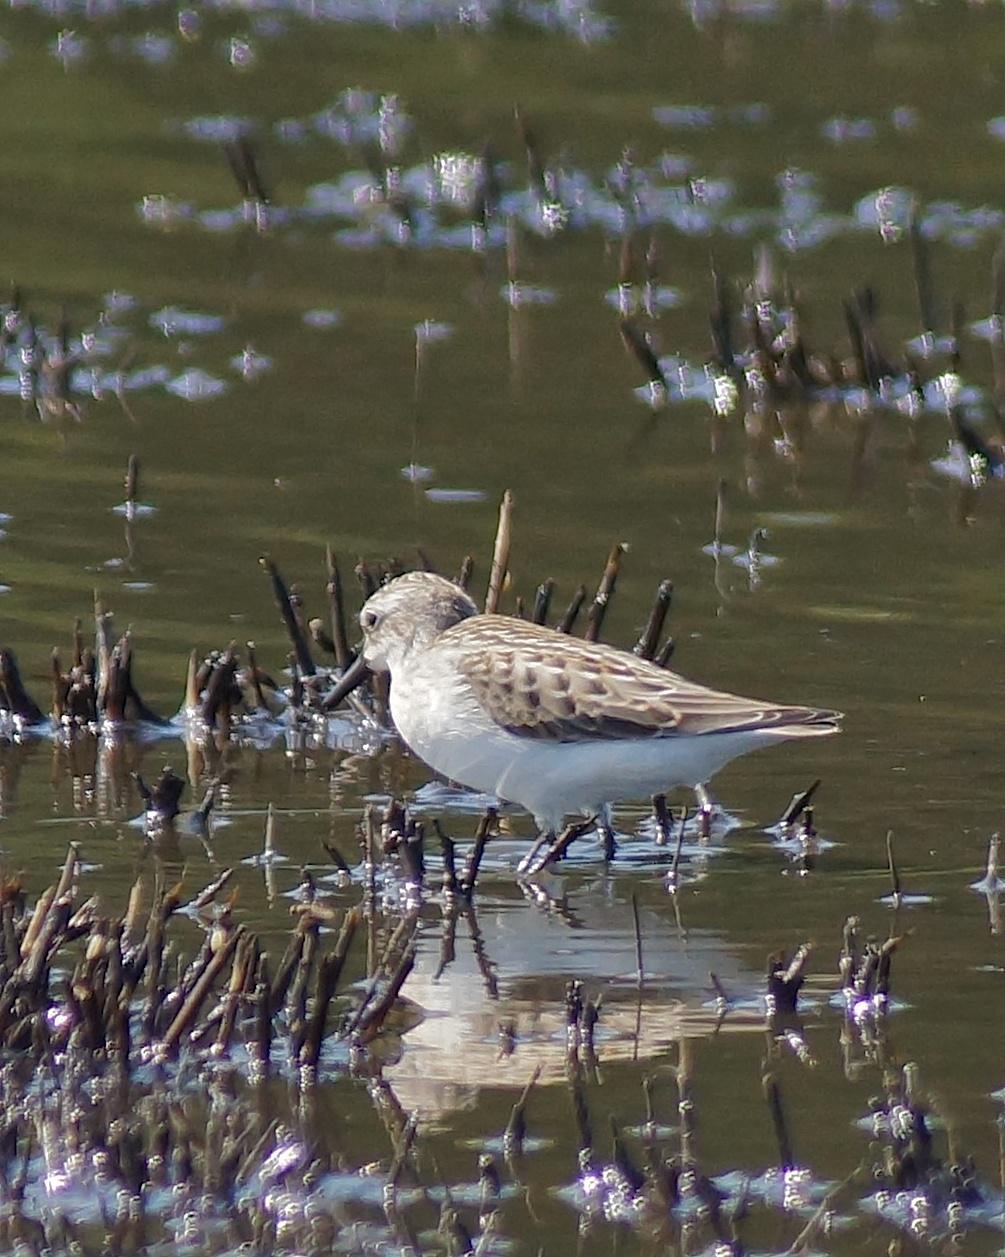 Semipalmated Sandpiper Photo by Gerald Hoekstra